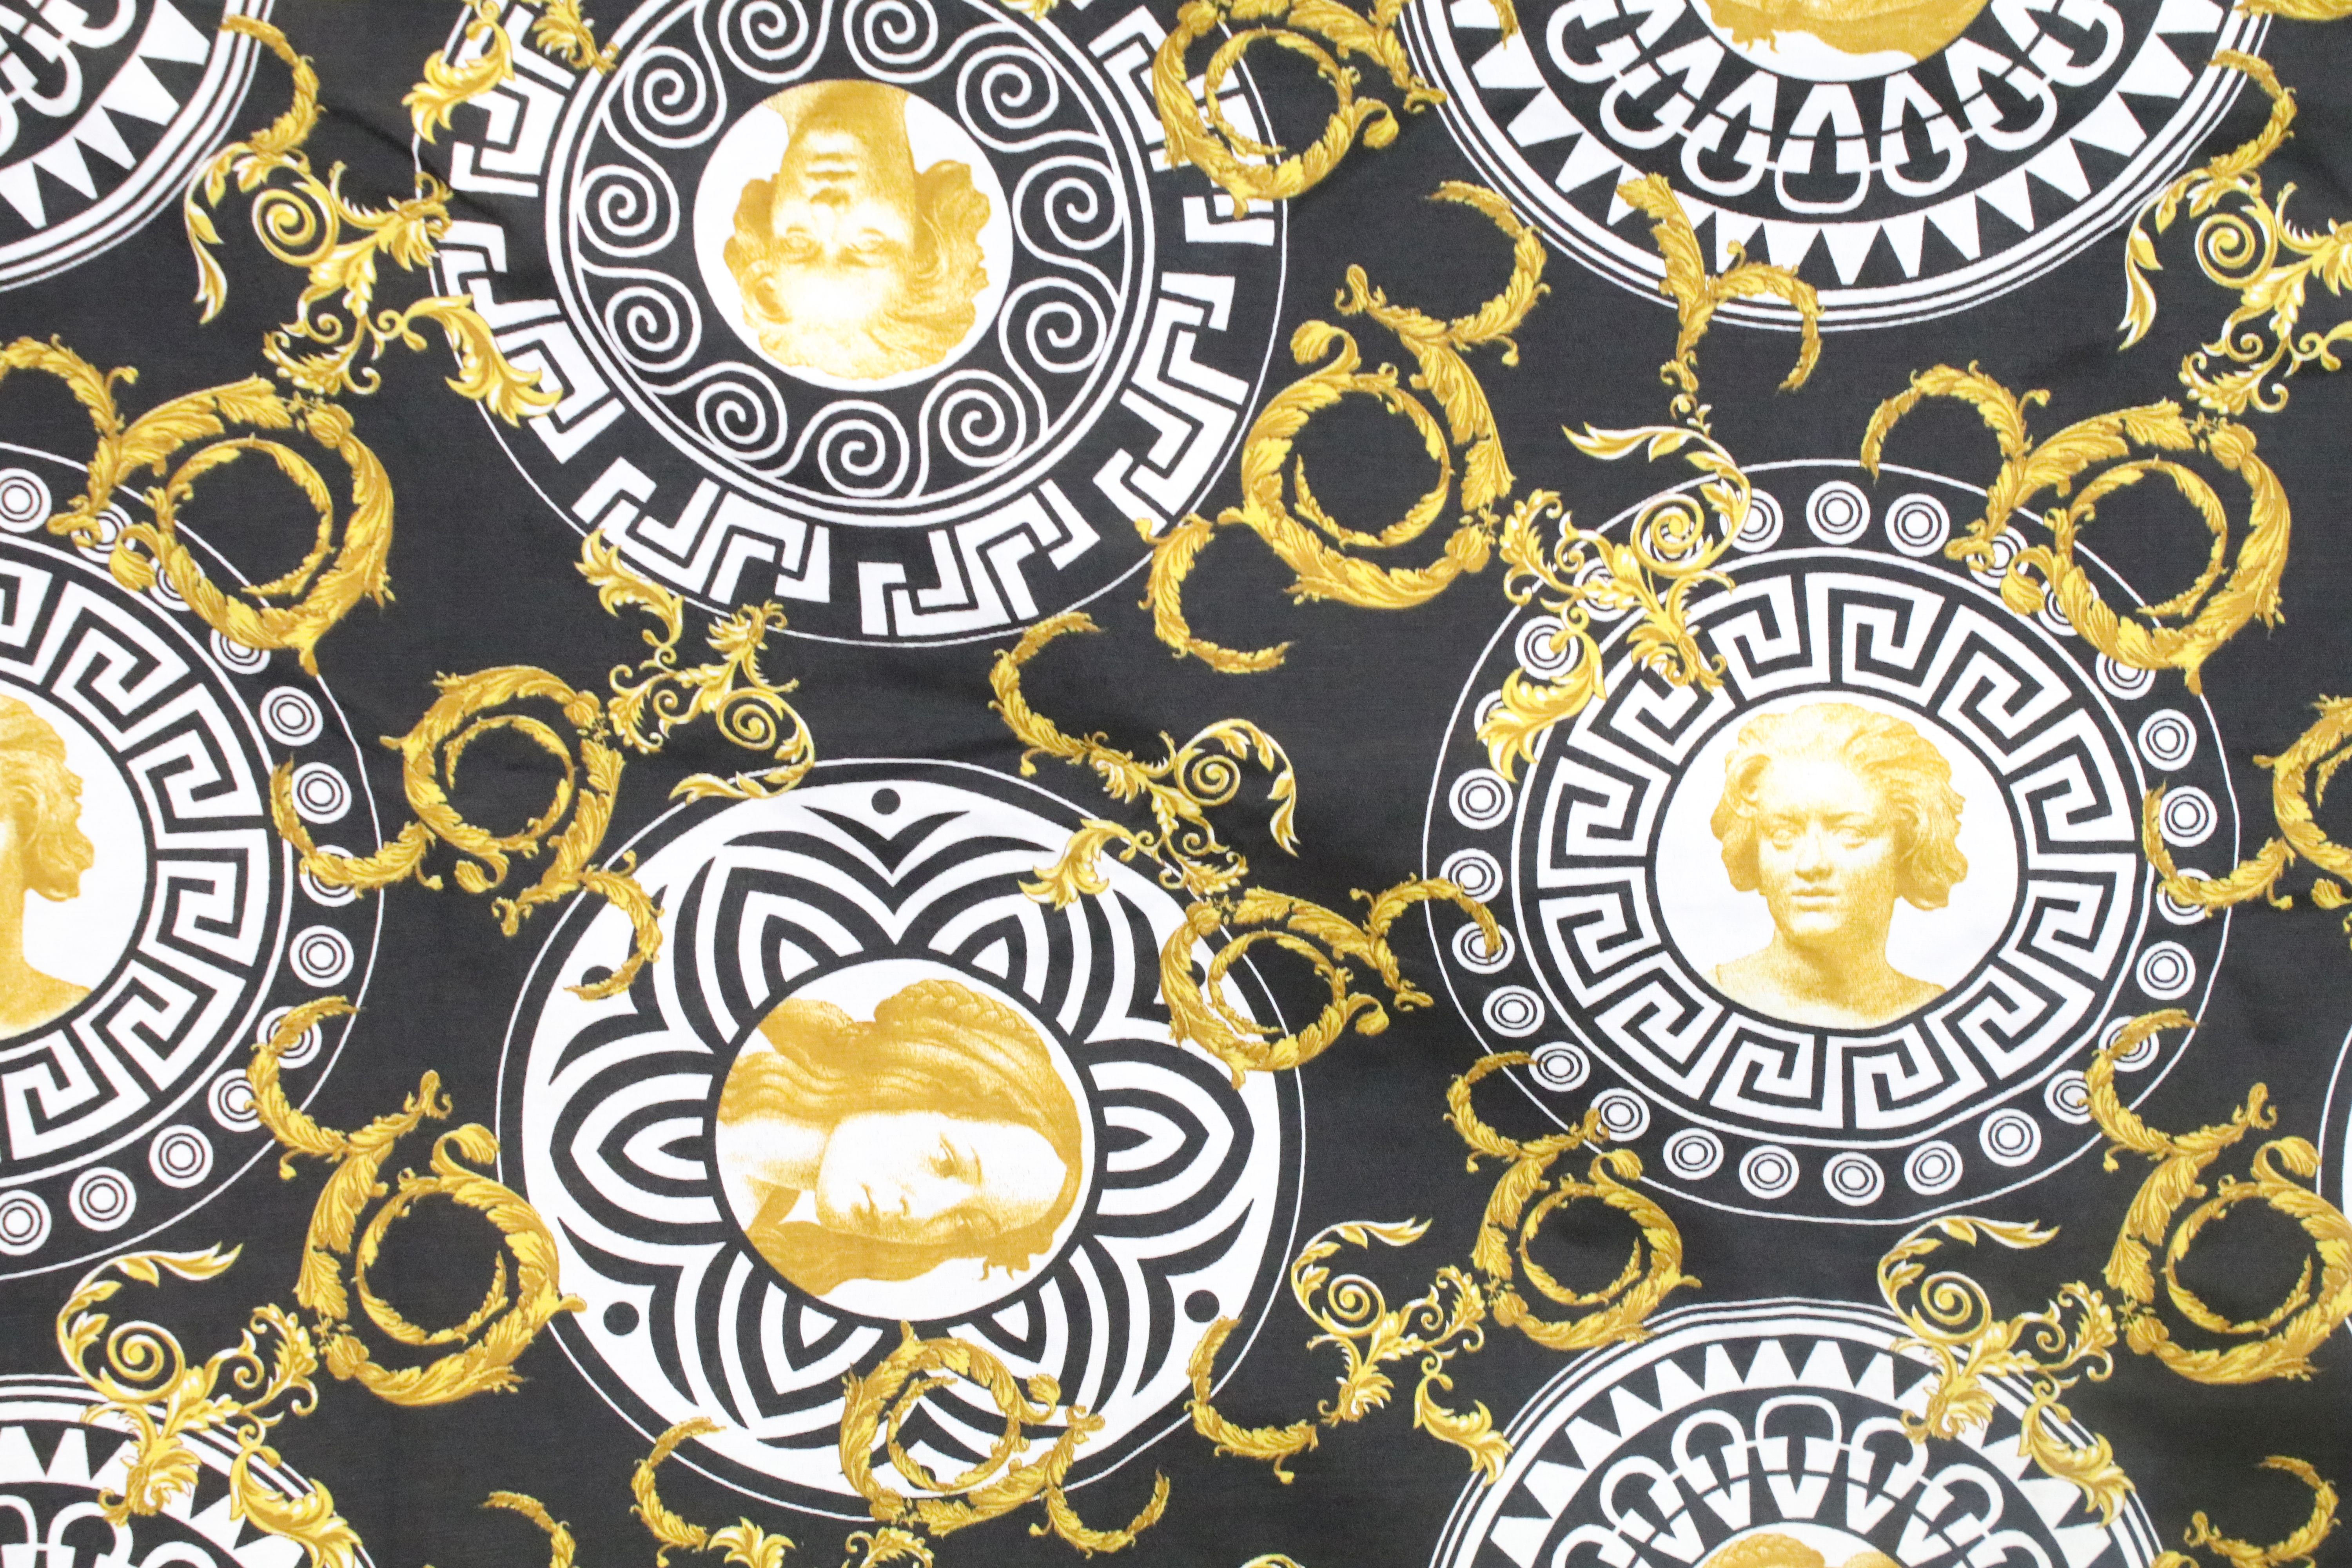 Large piece of black ground Versace style fabric, with repeating spiralling gold acanthus leaves - Image 2 of 5